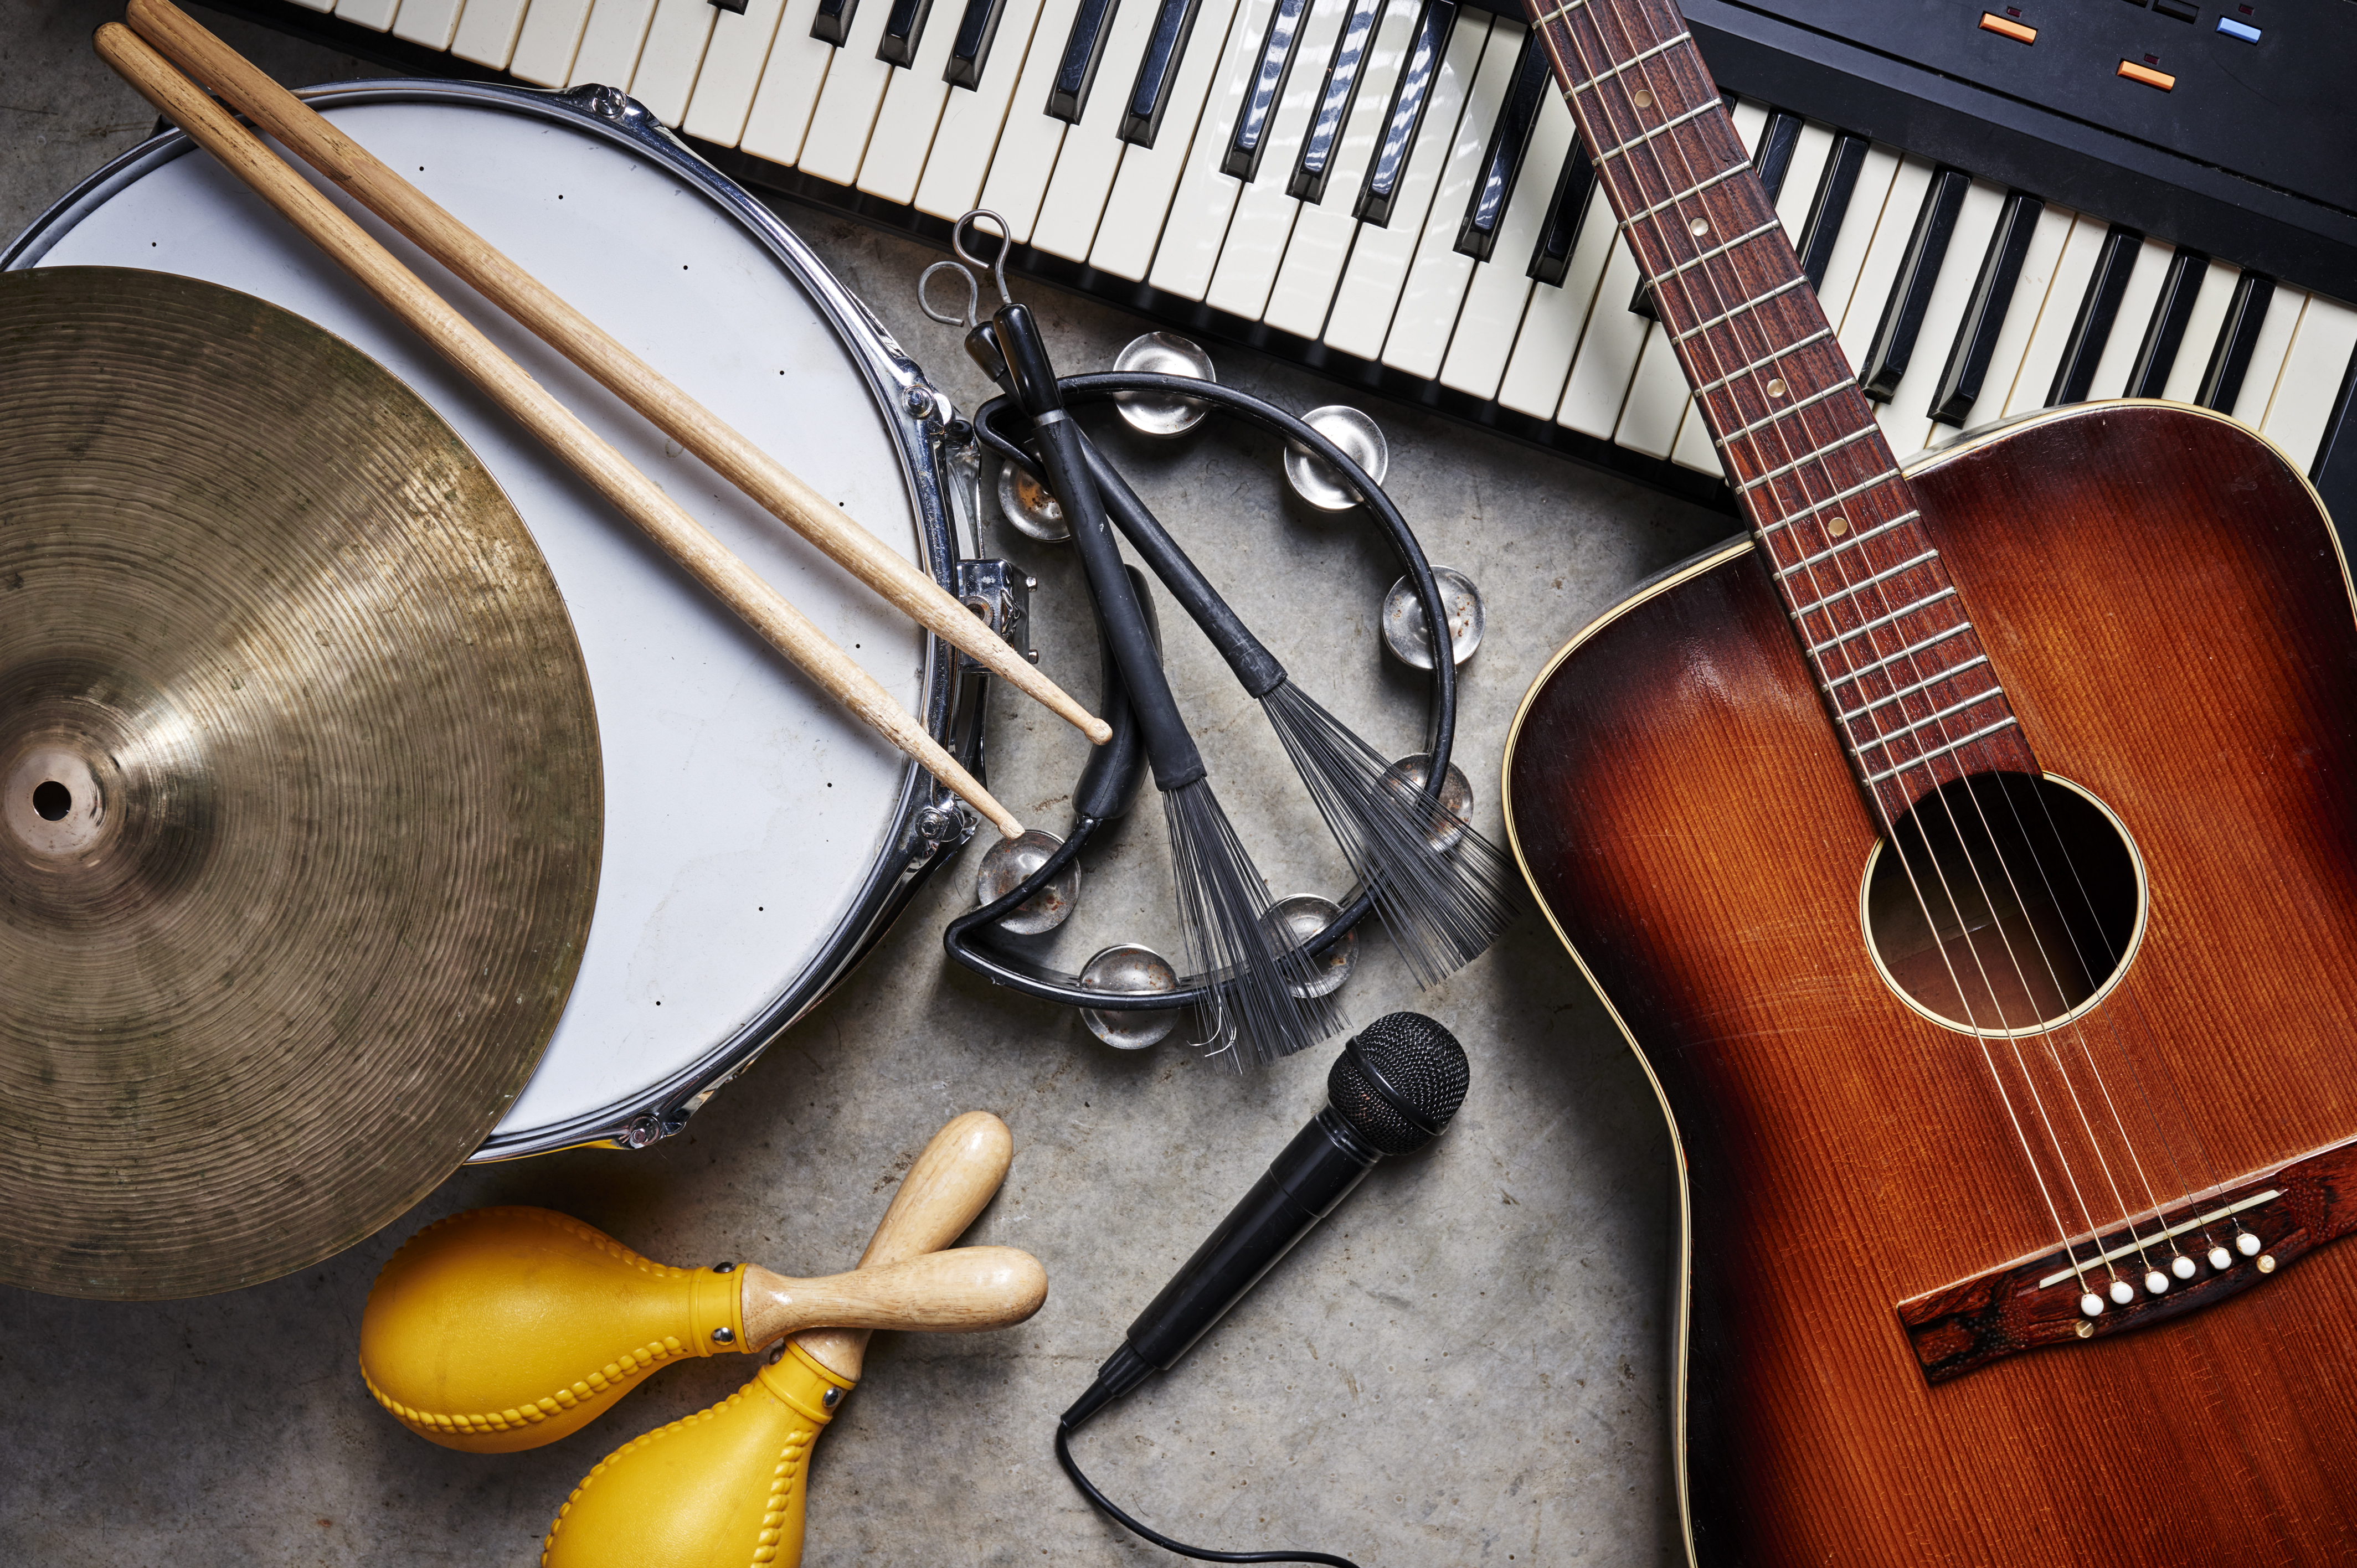 Various instruments laid out on floor including symbols, drum, keyboard, microphone, and guitar